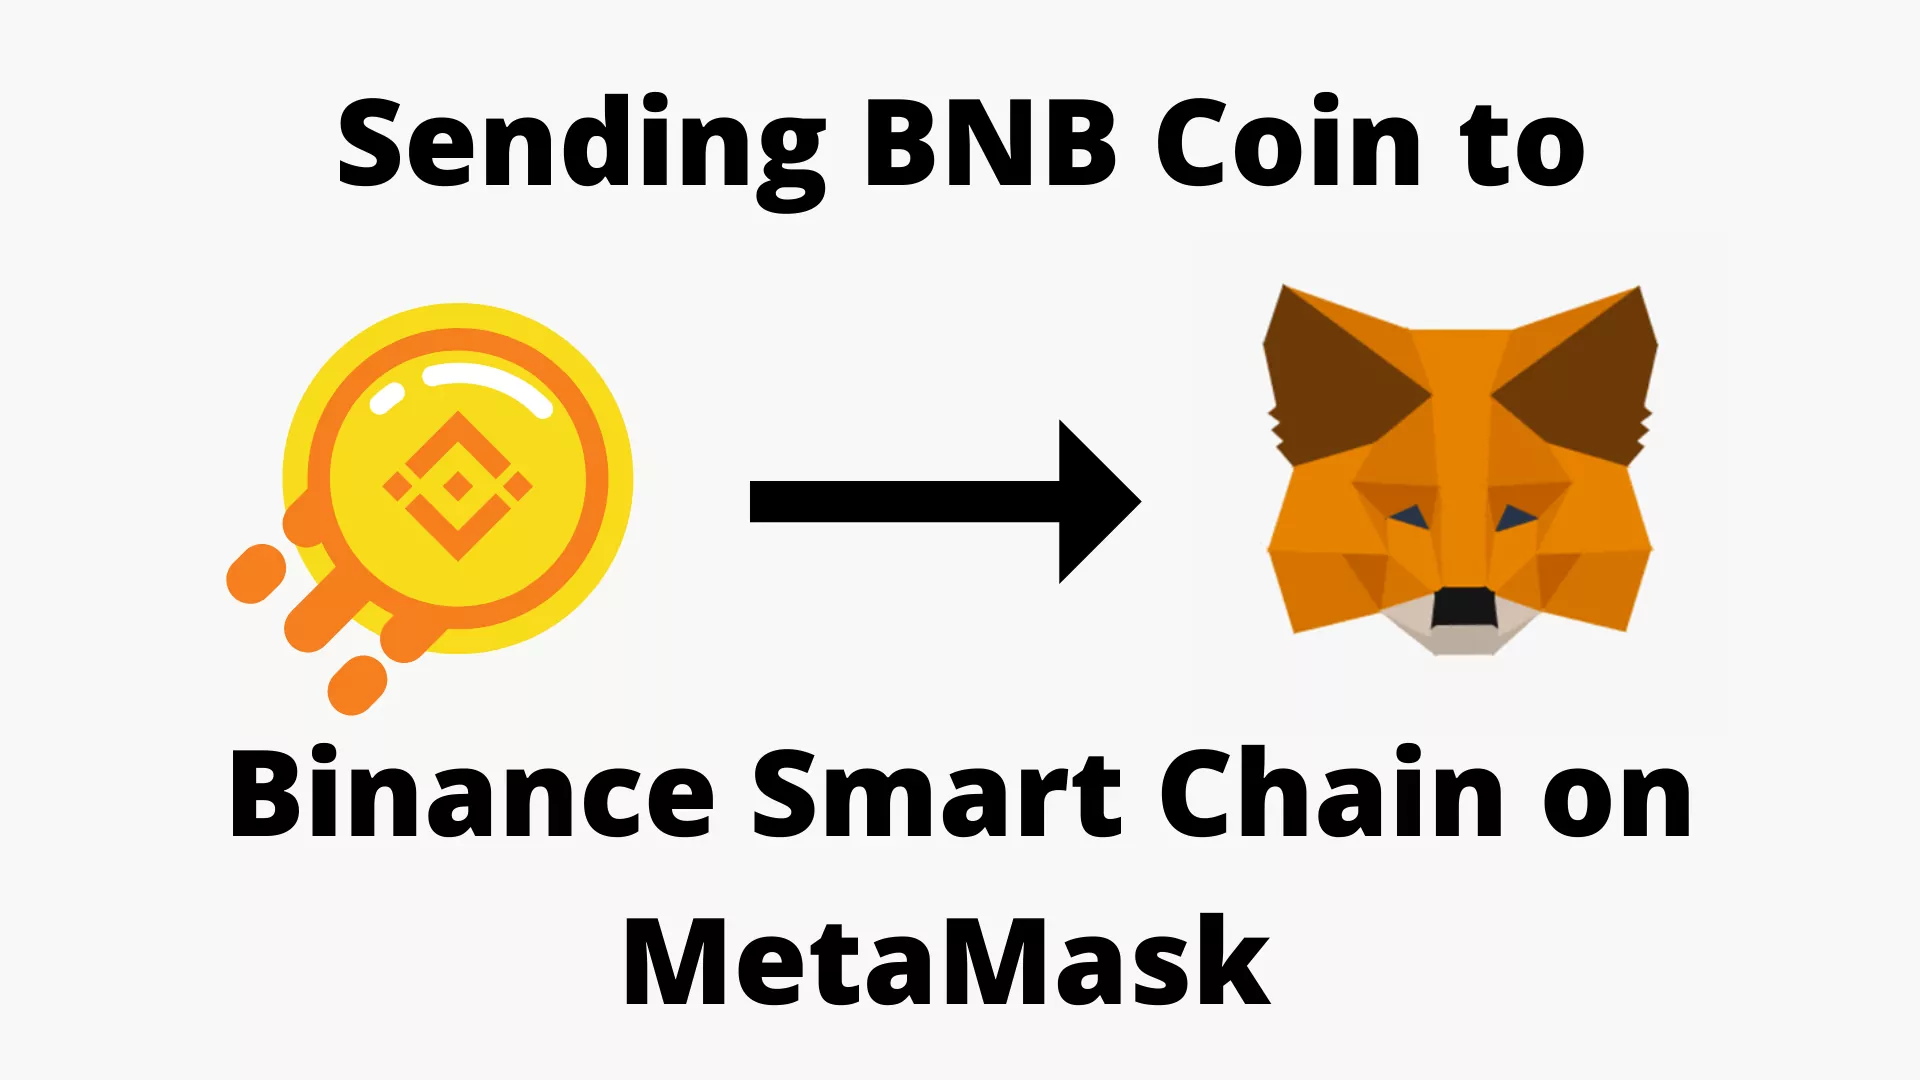 How to send BNB to a MetaMask wallet